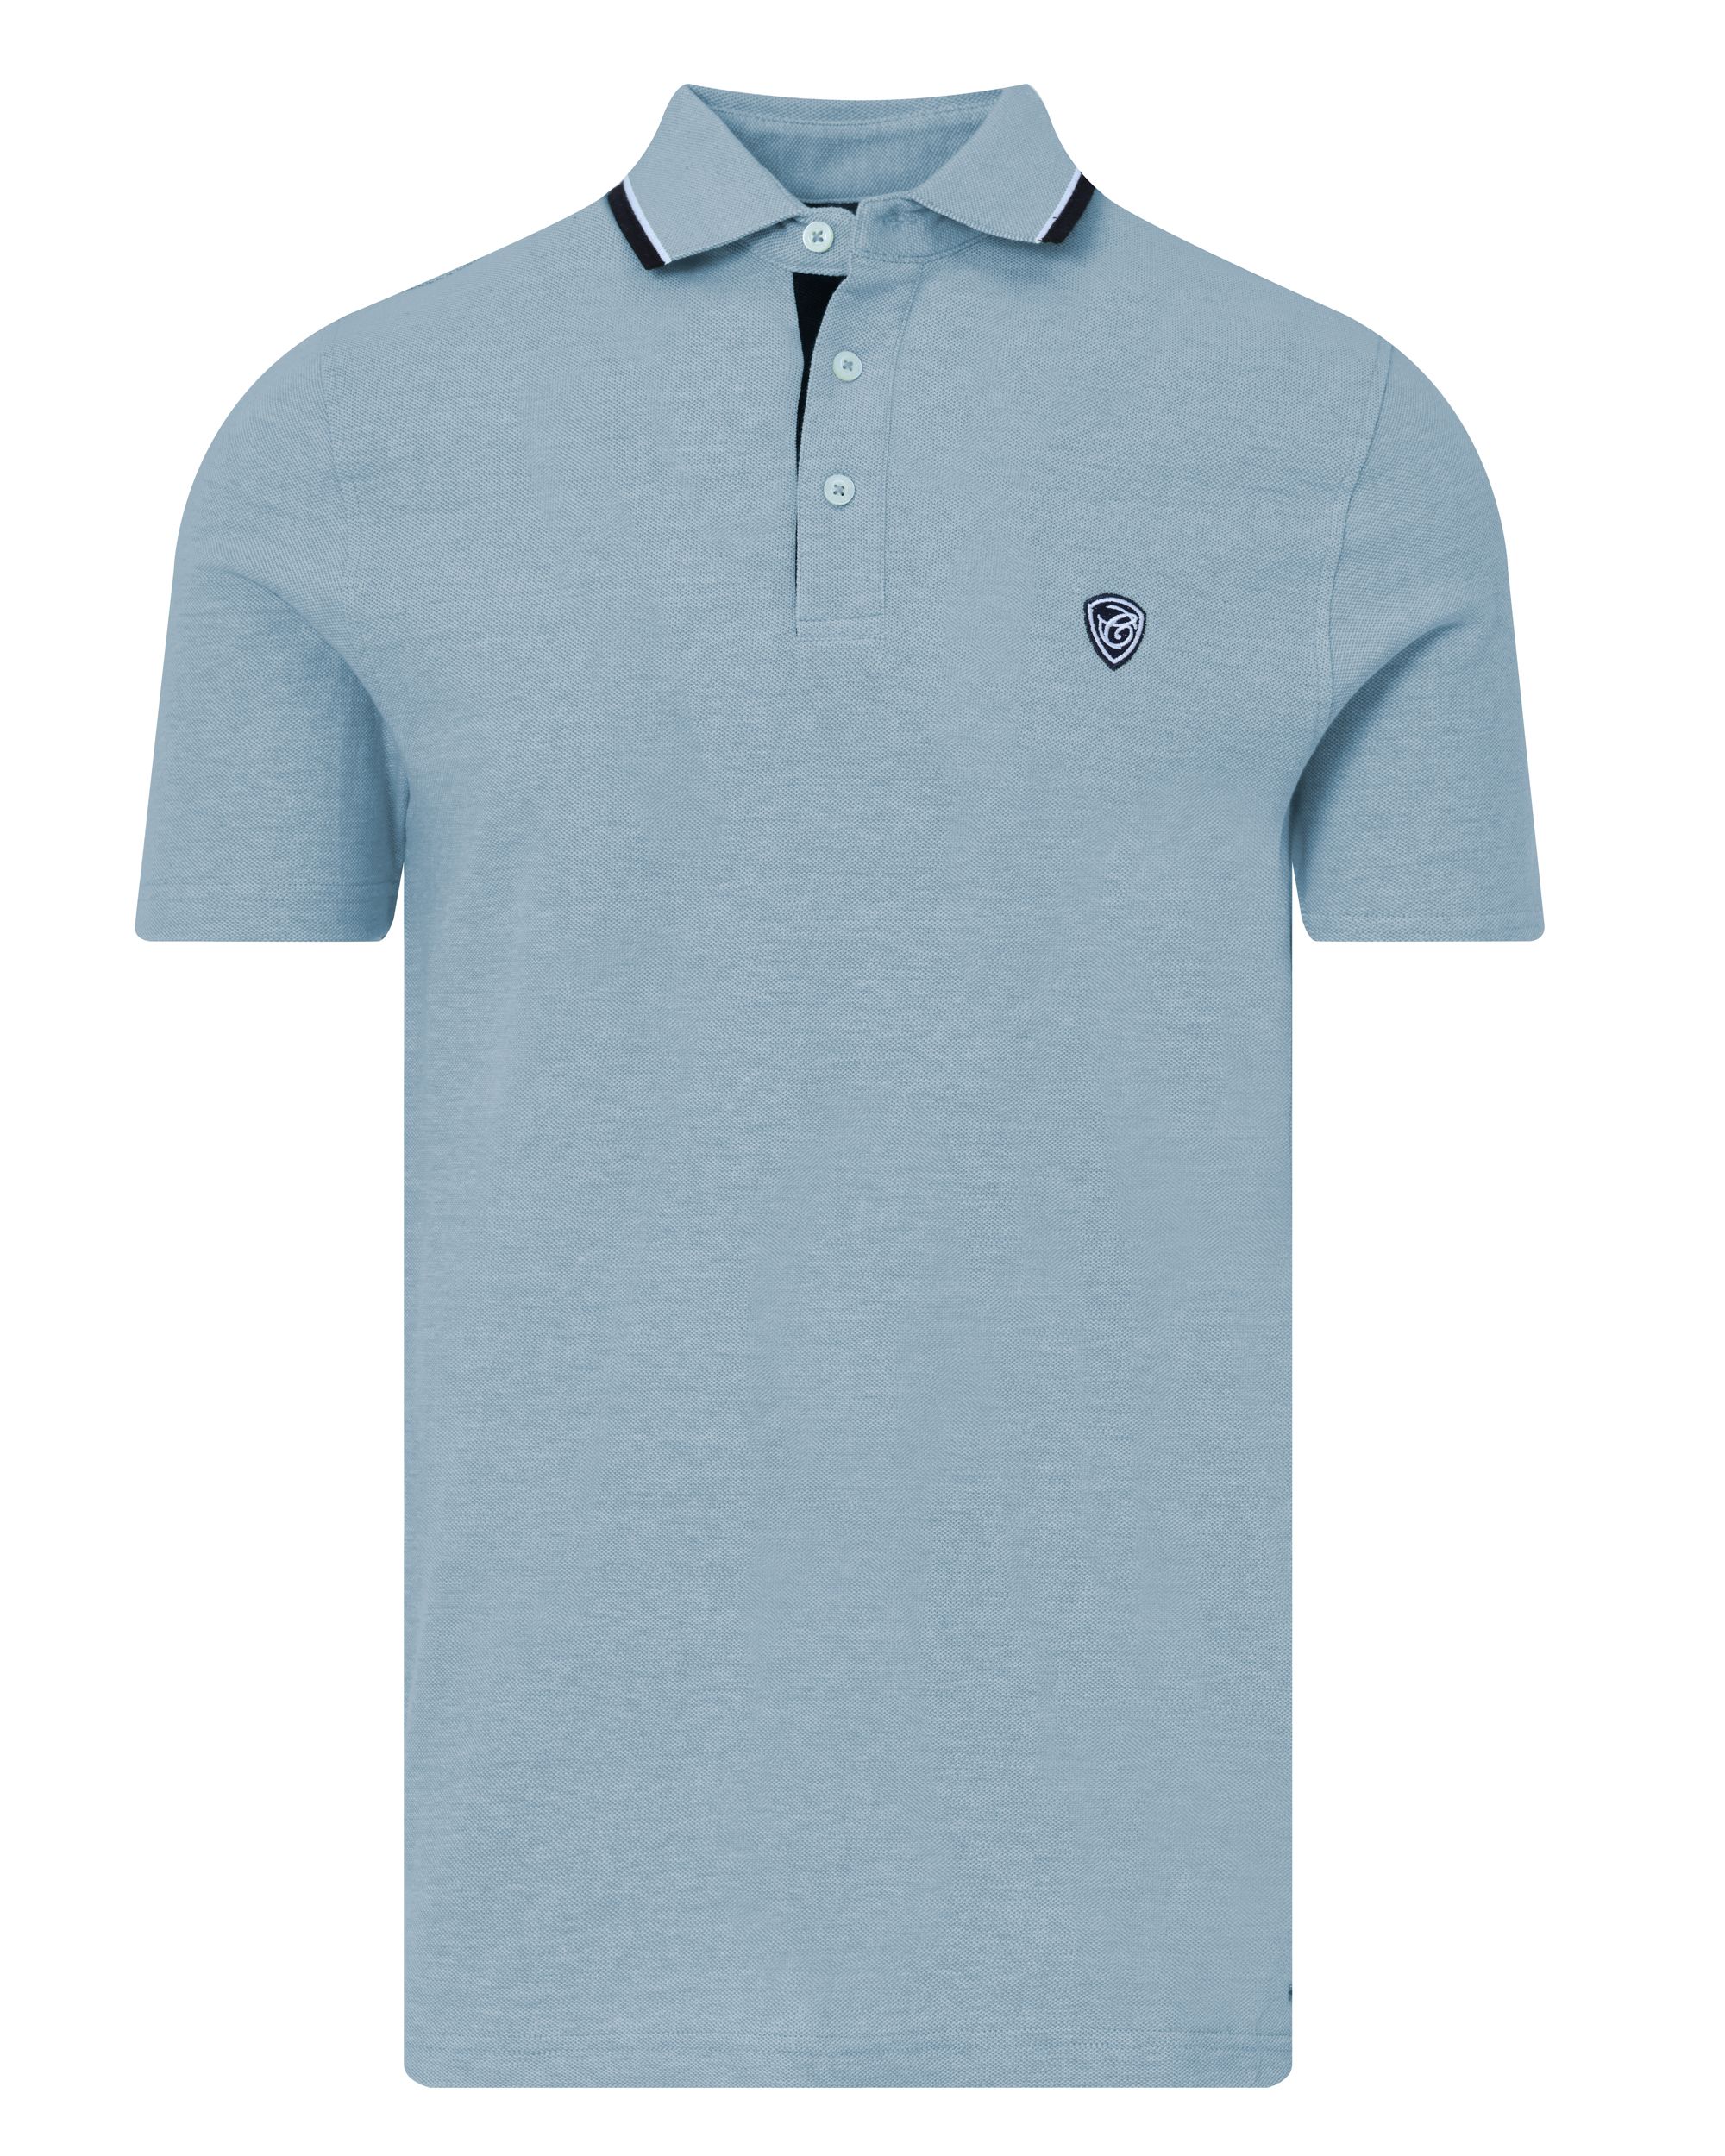 Campbell Stanson Polo KM Brittany Blue 081528-010-XL